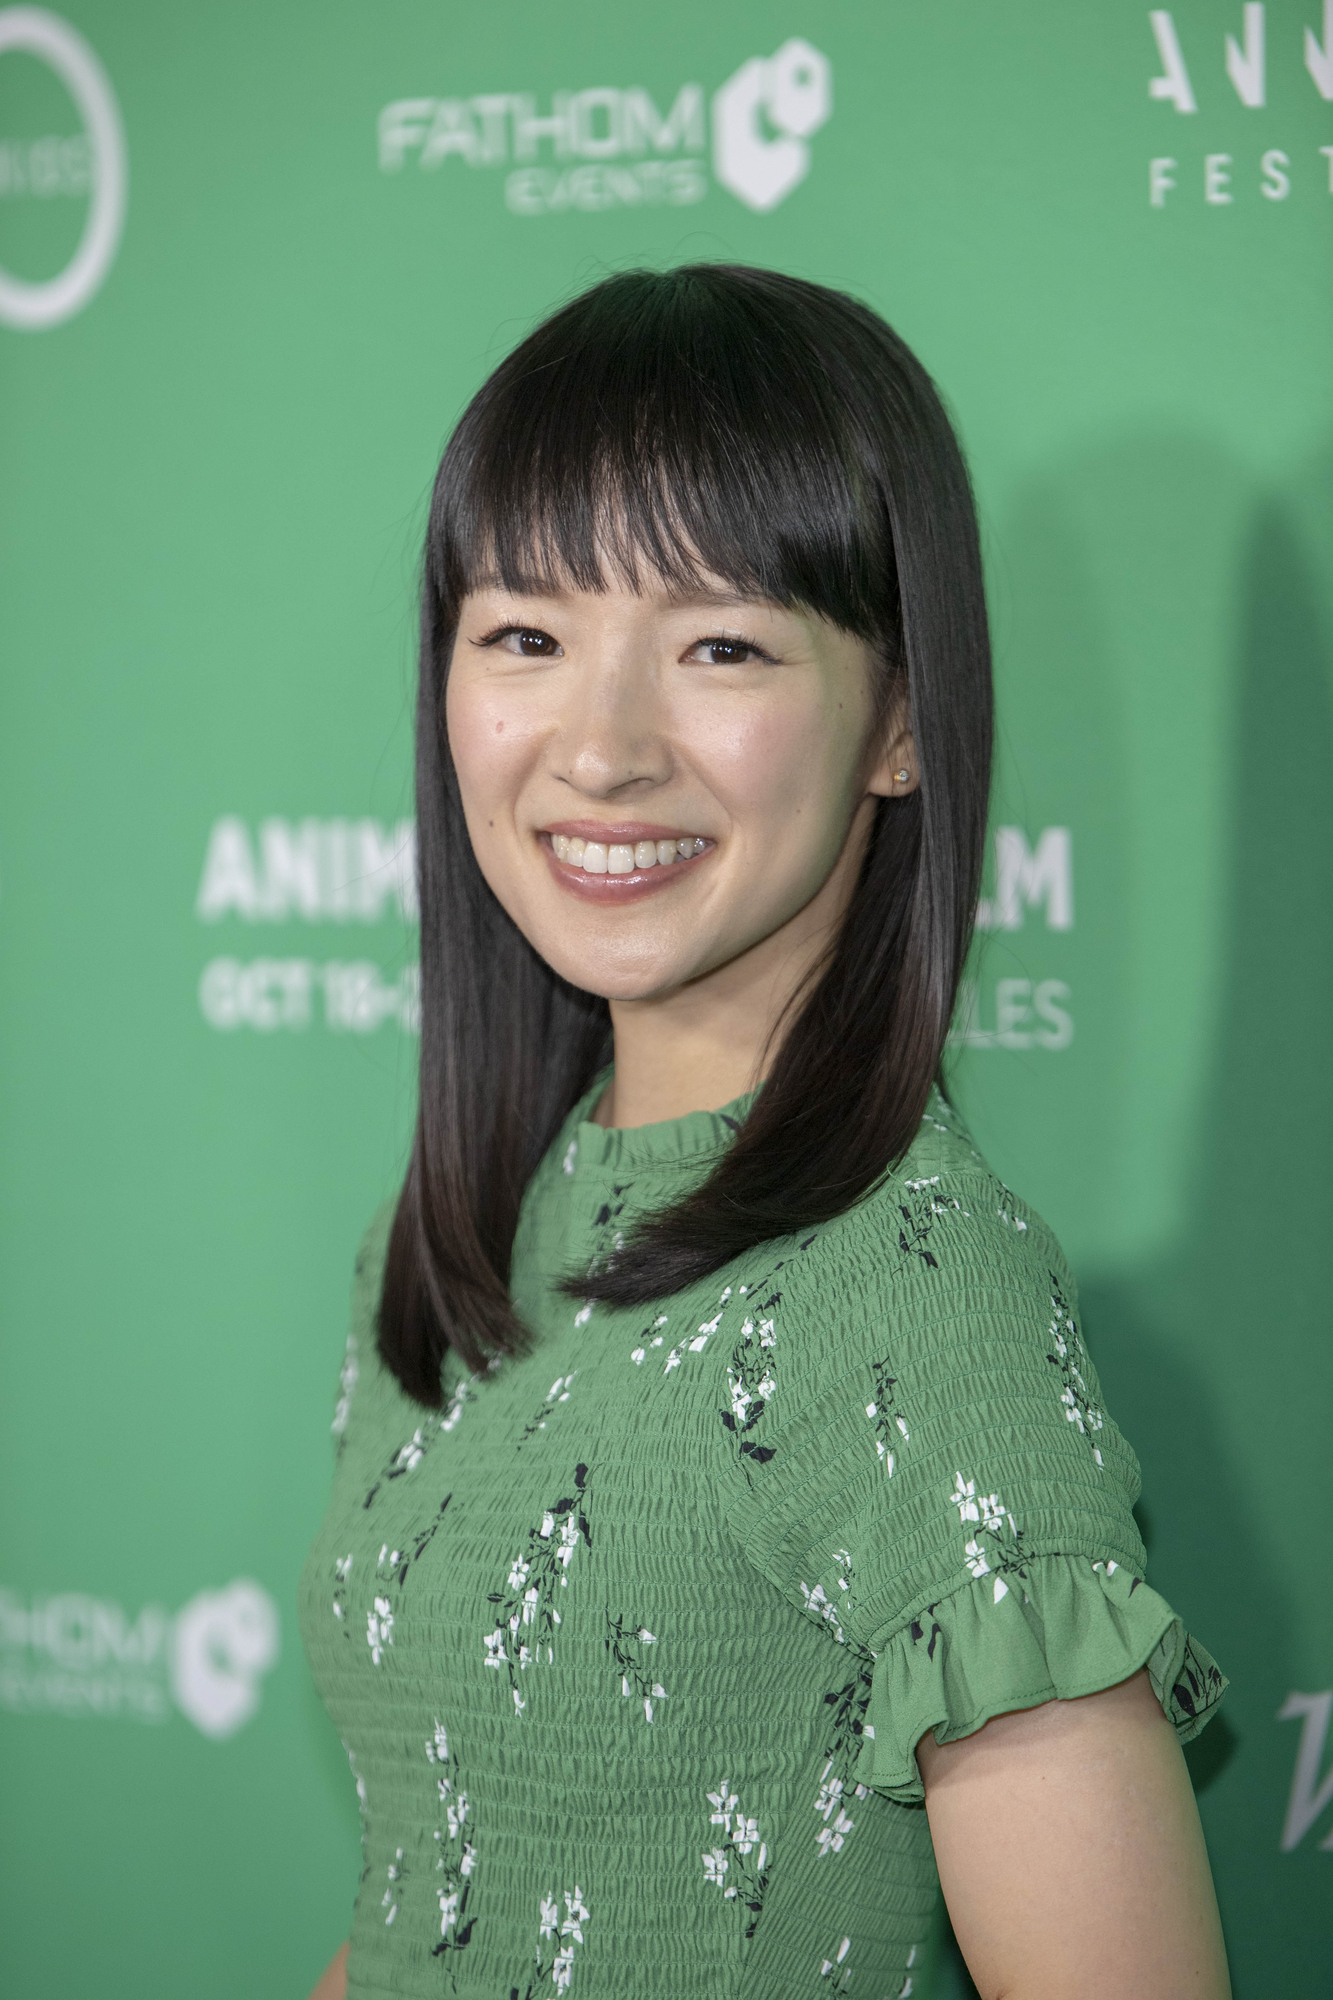 Marie Kondo attends Third Annual Animation Is Film Festival Opening Night "Weathering With You" US Premiere at TCL Chinese 6 Theatre, Hollywood, CA on October 18, 2019